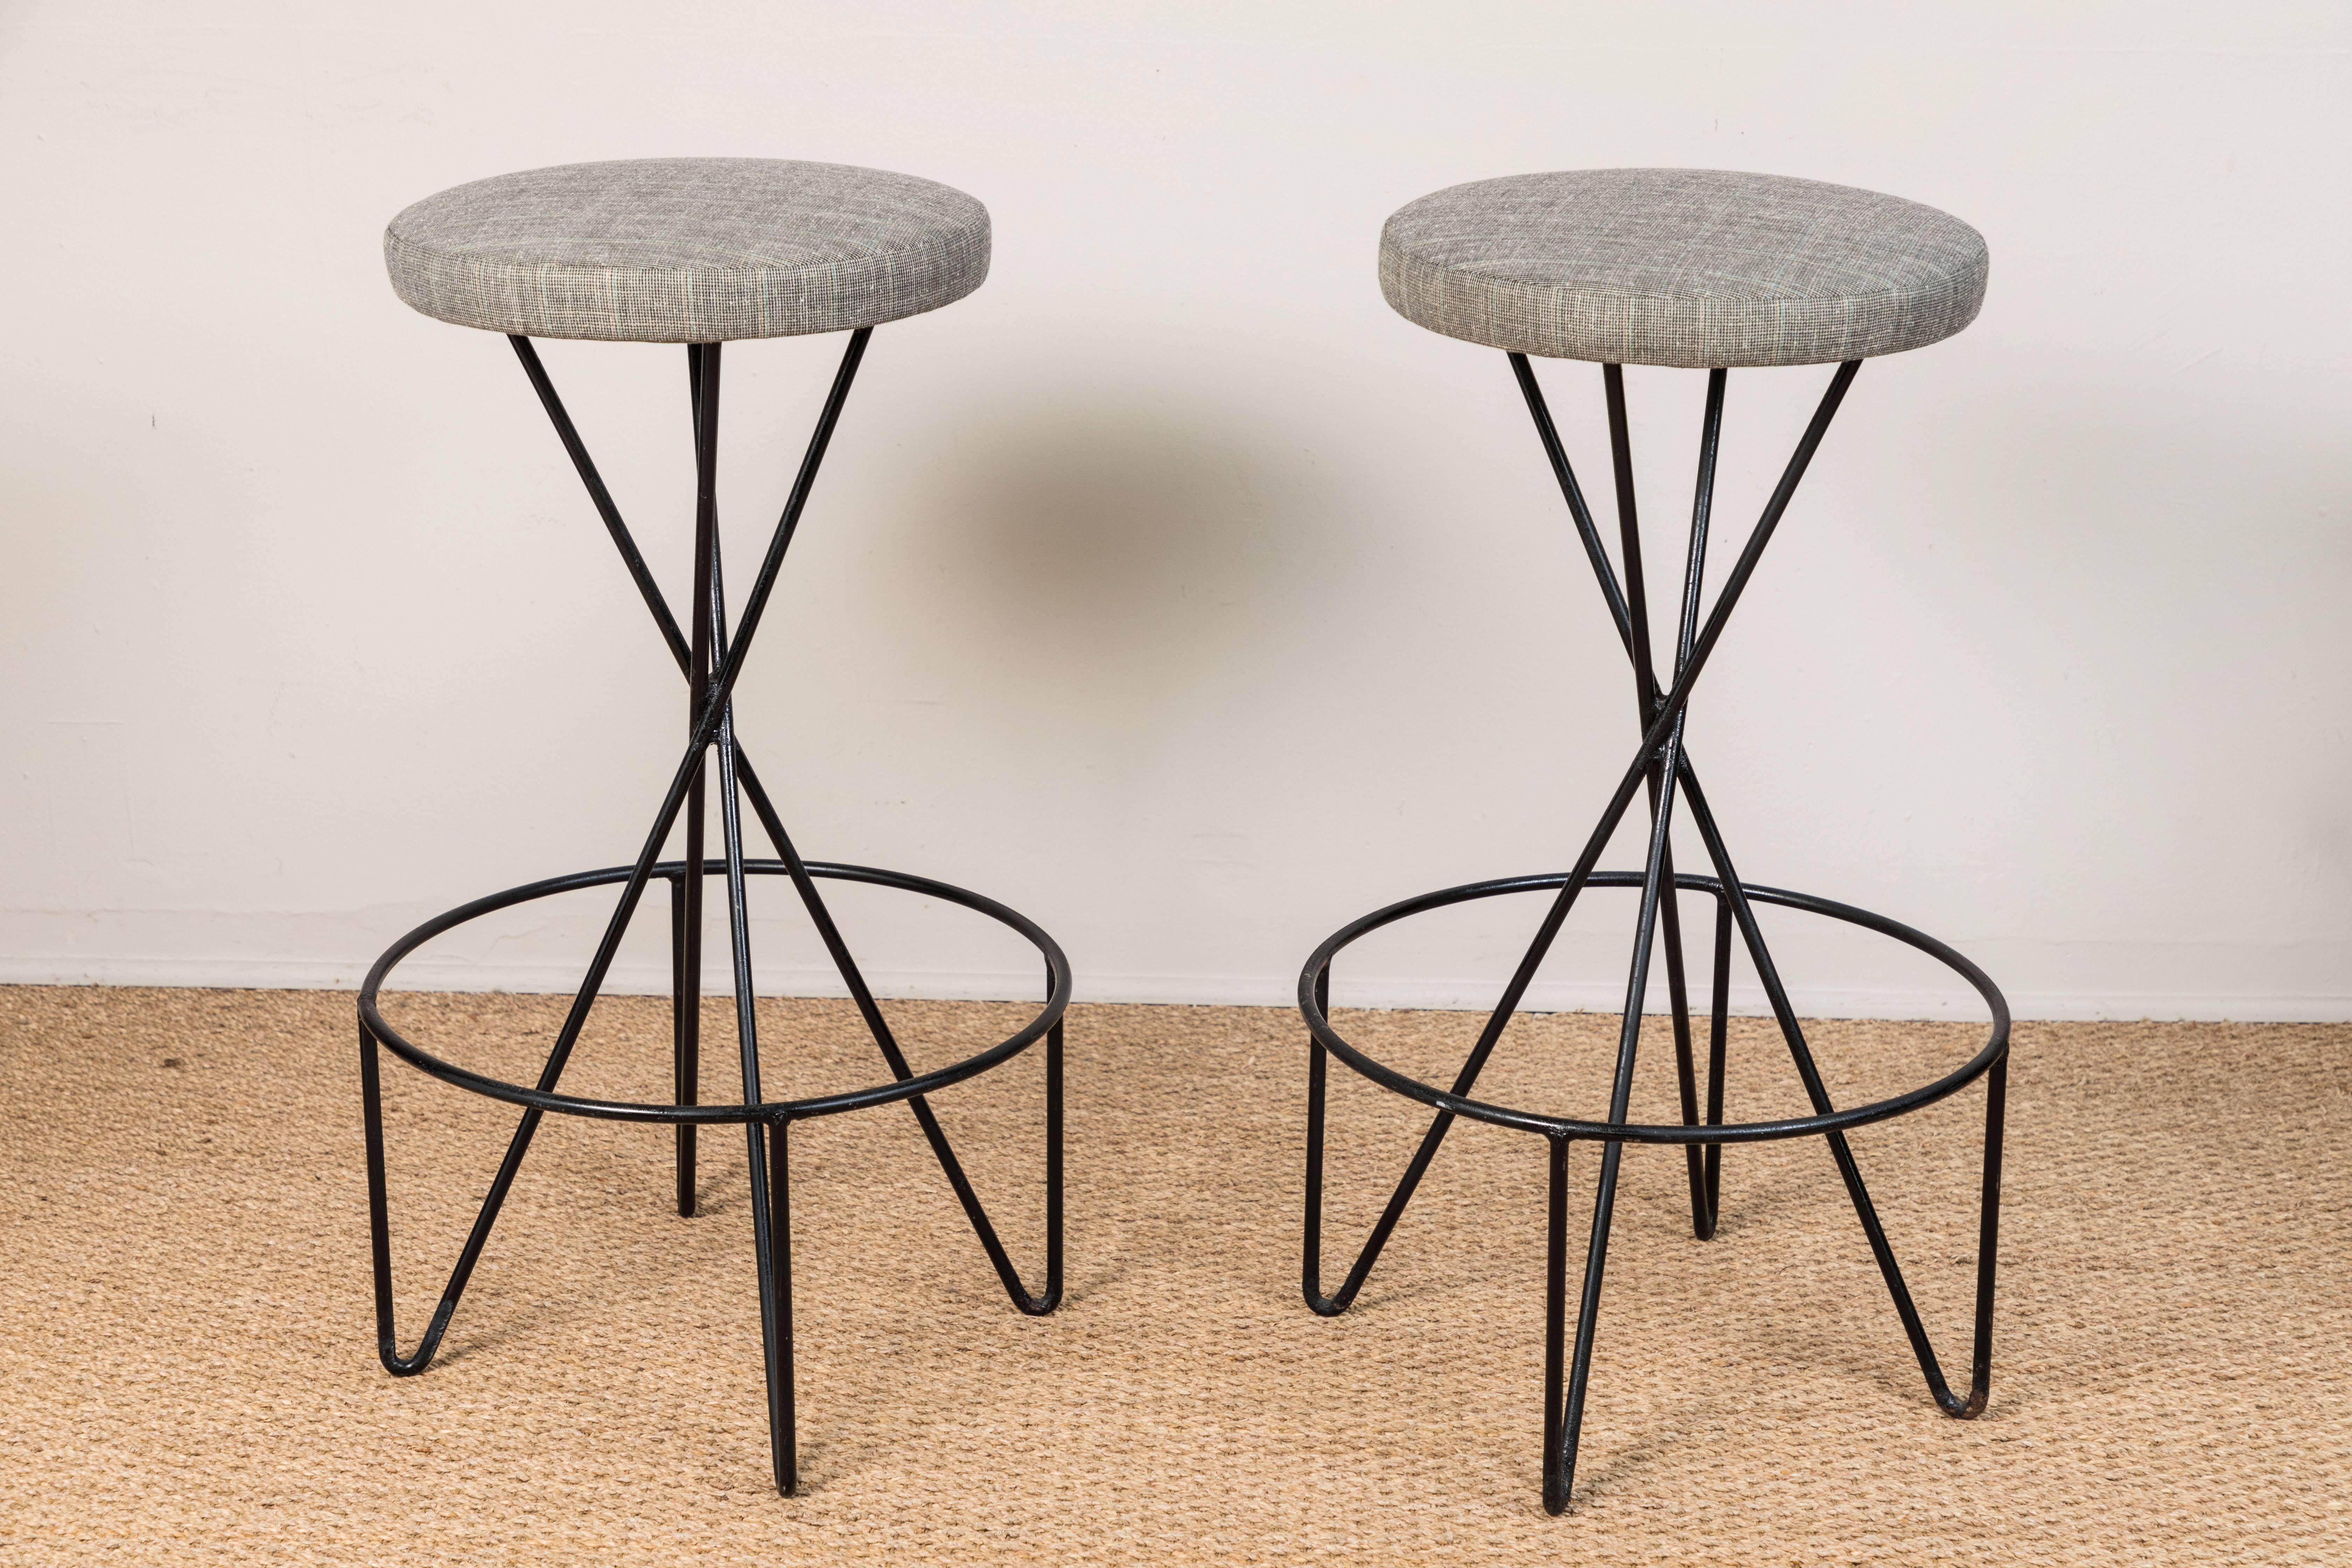 Wrought iron stools with reupholstered seats - wool suiting fabric.   